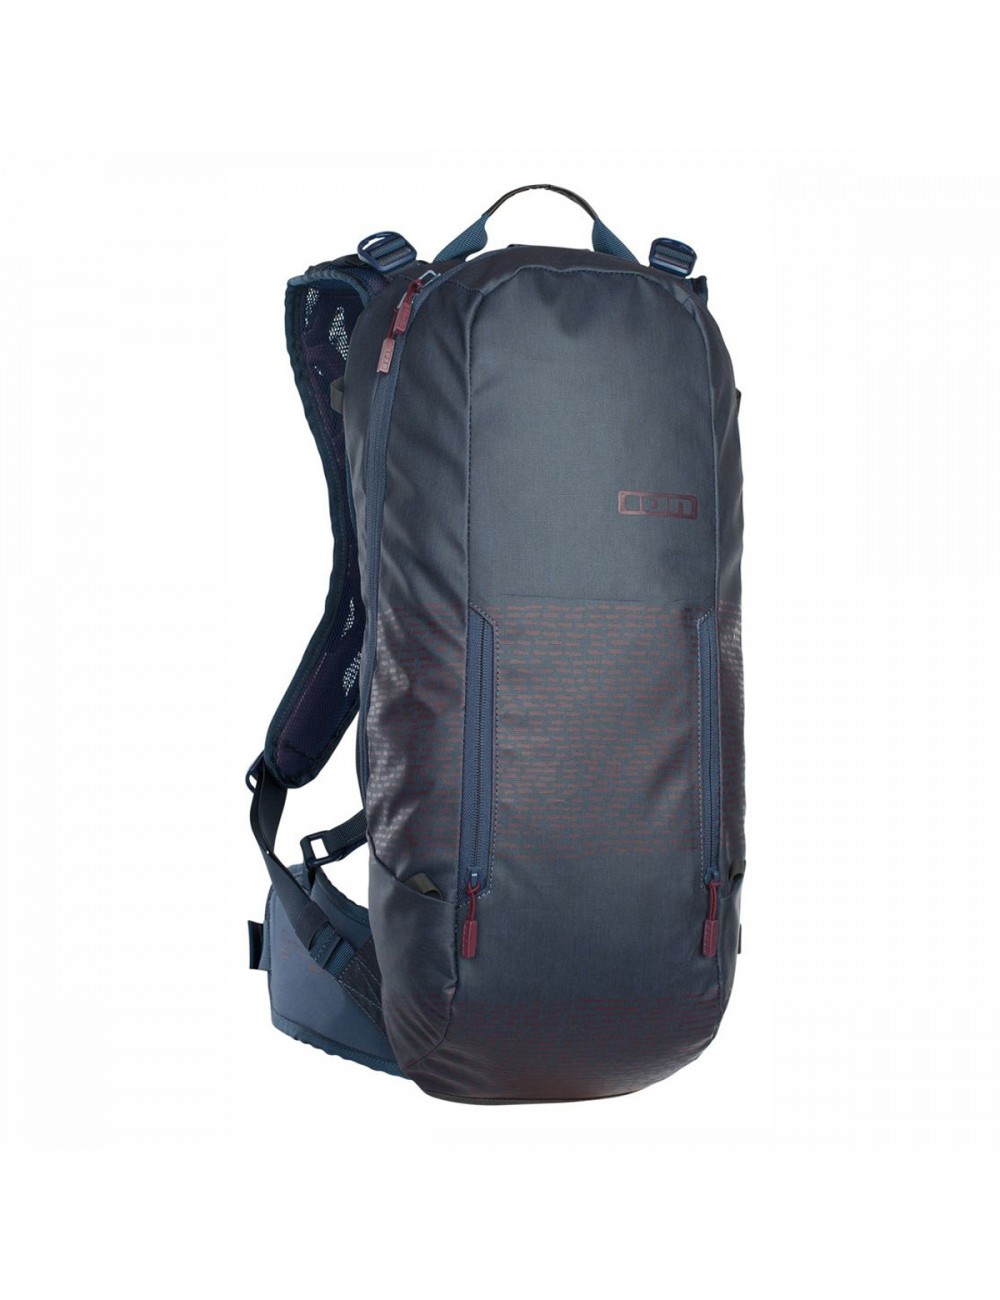 ION Rampart 8 Backpack - Blue Nights